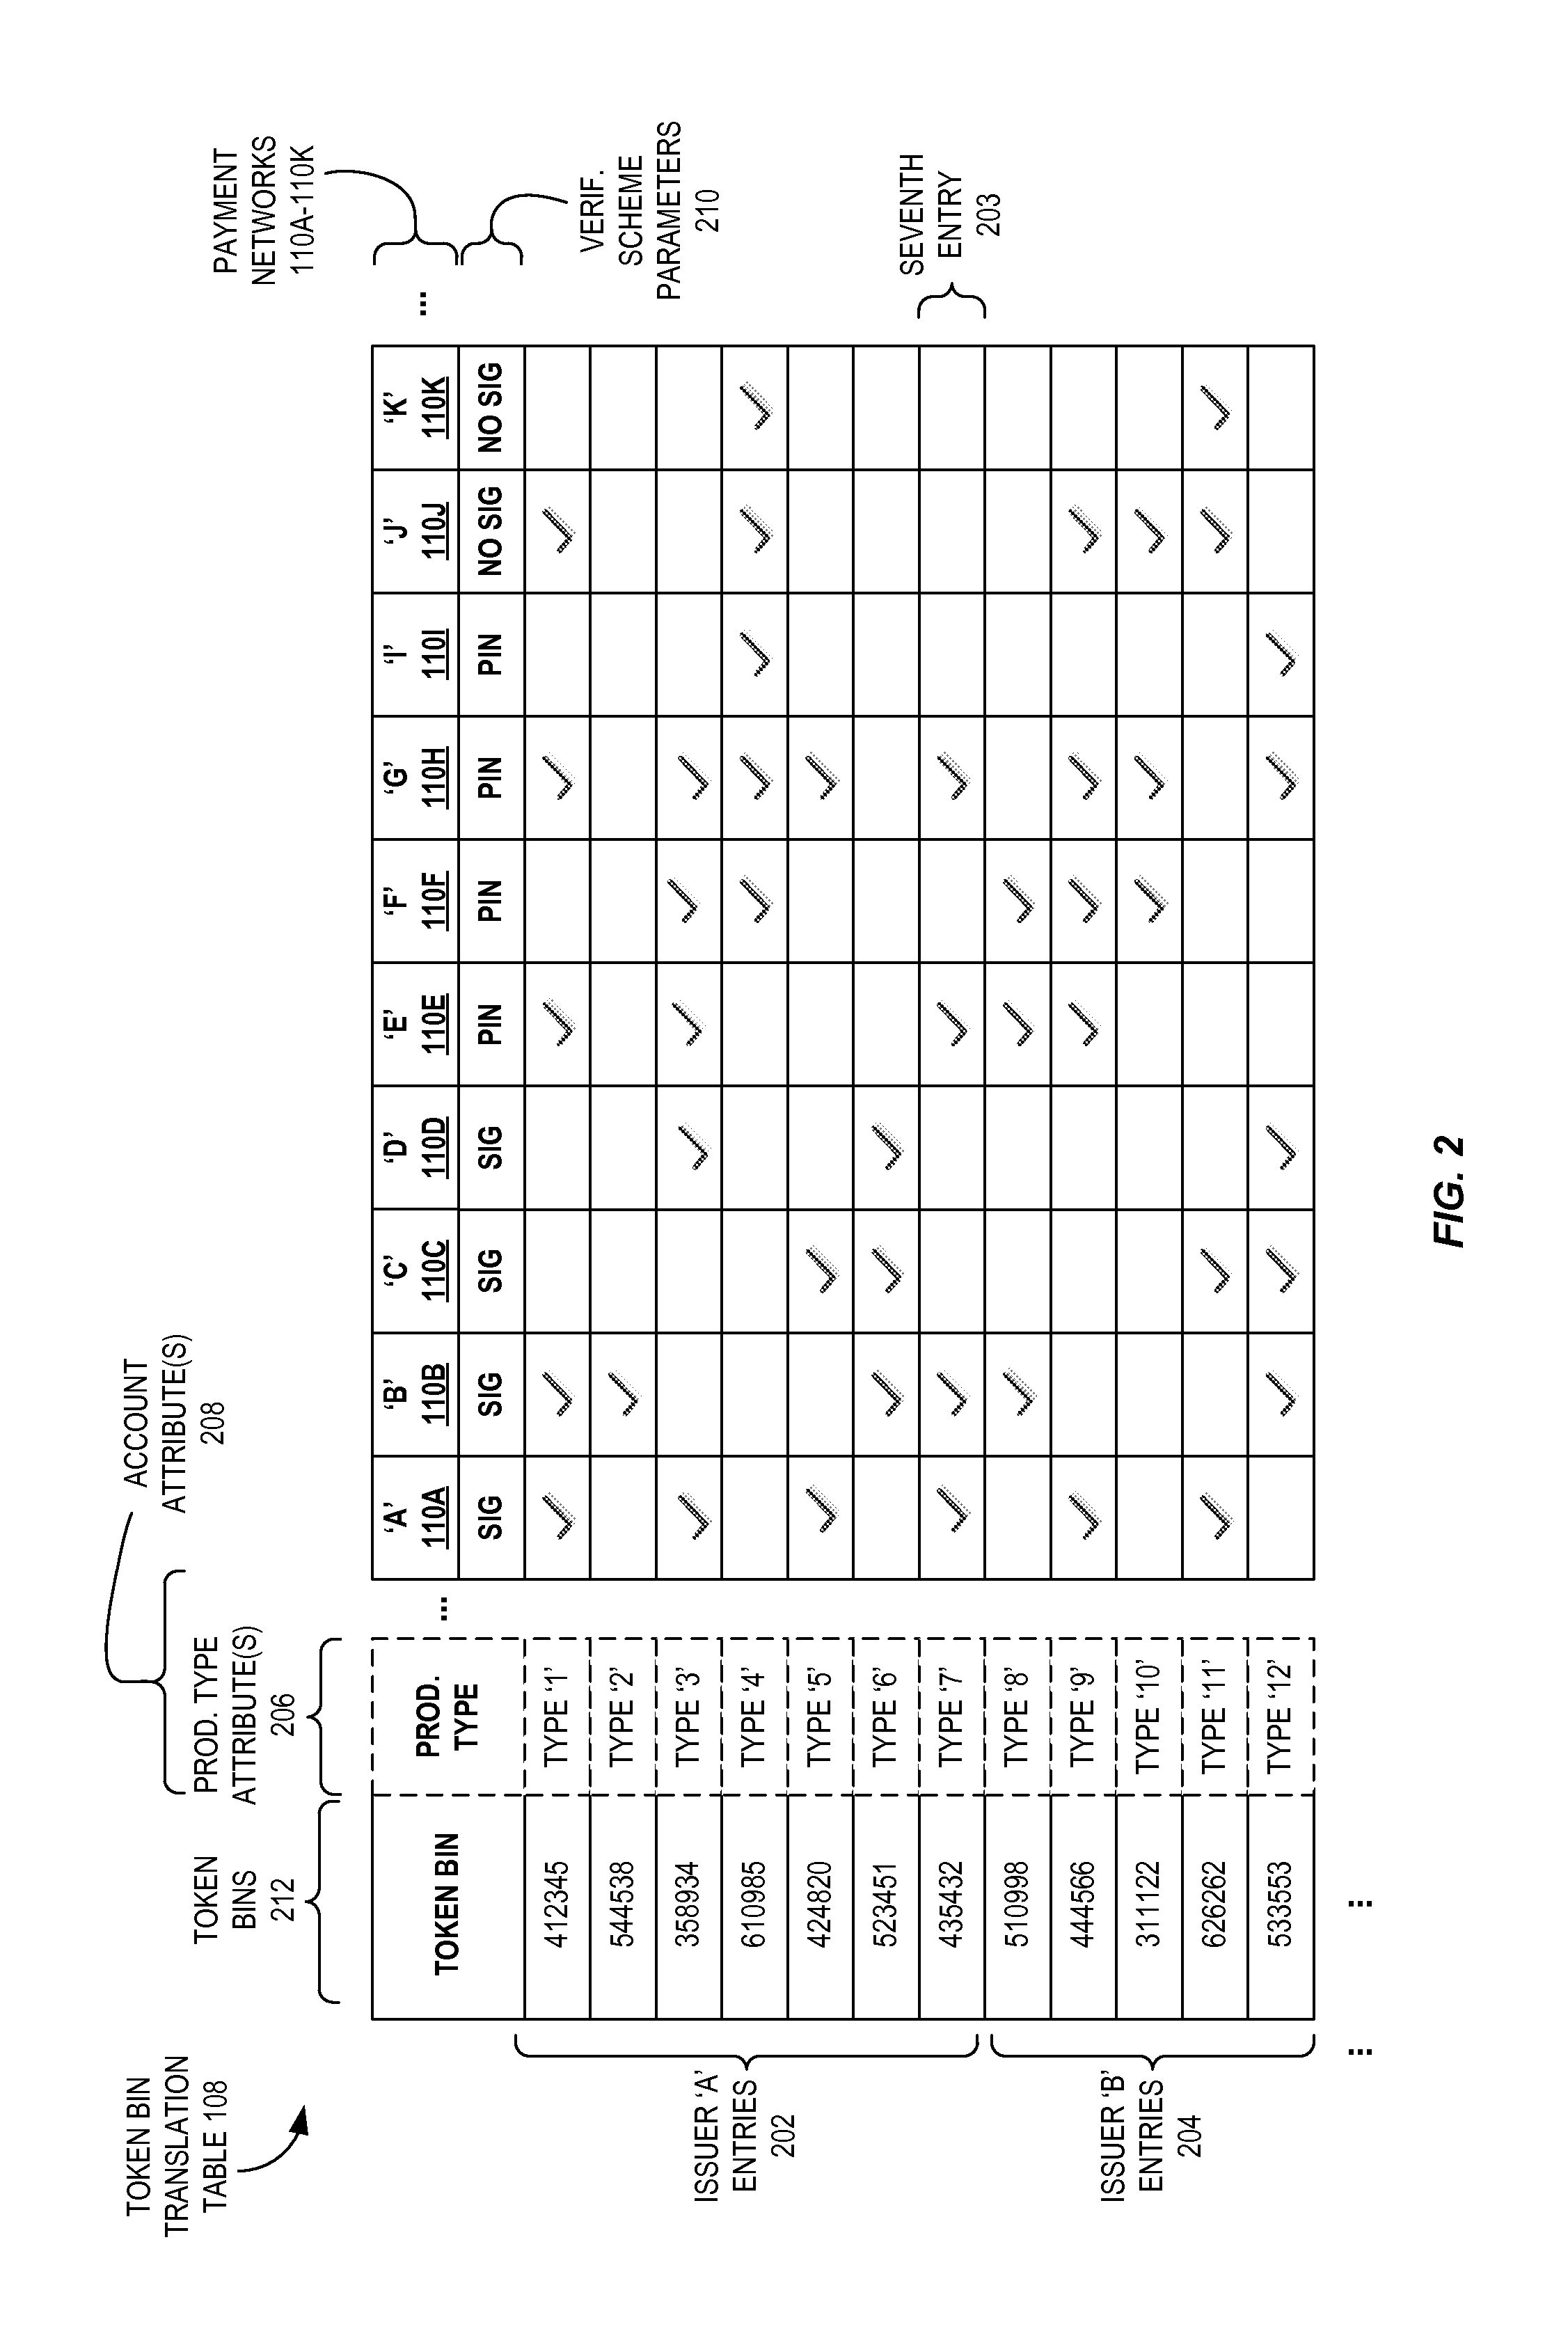 Multi-network token bin routing with defined verification parameters